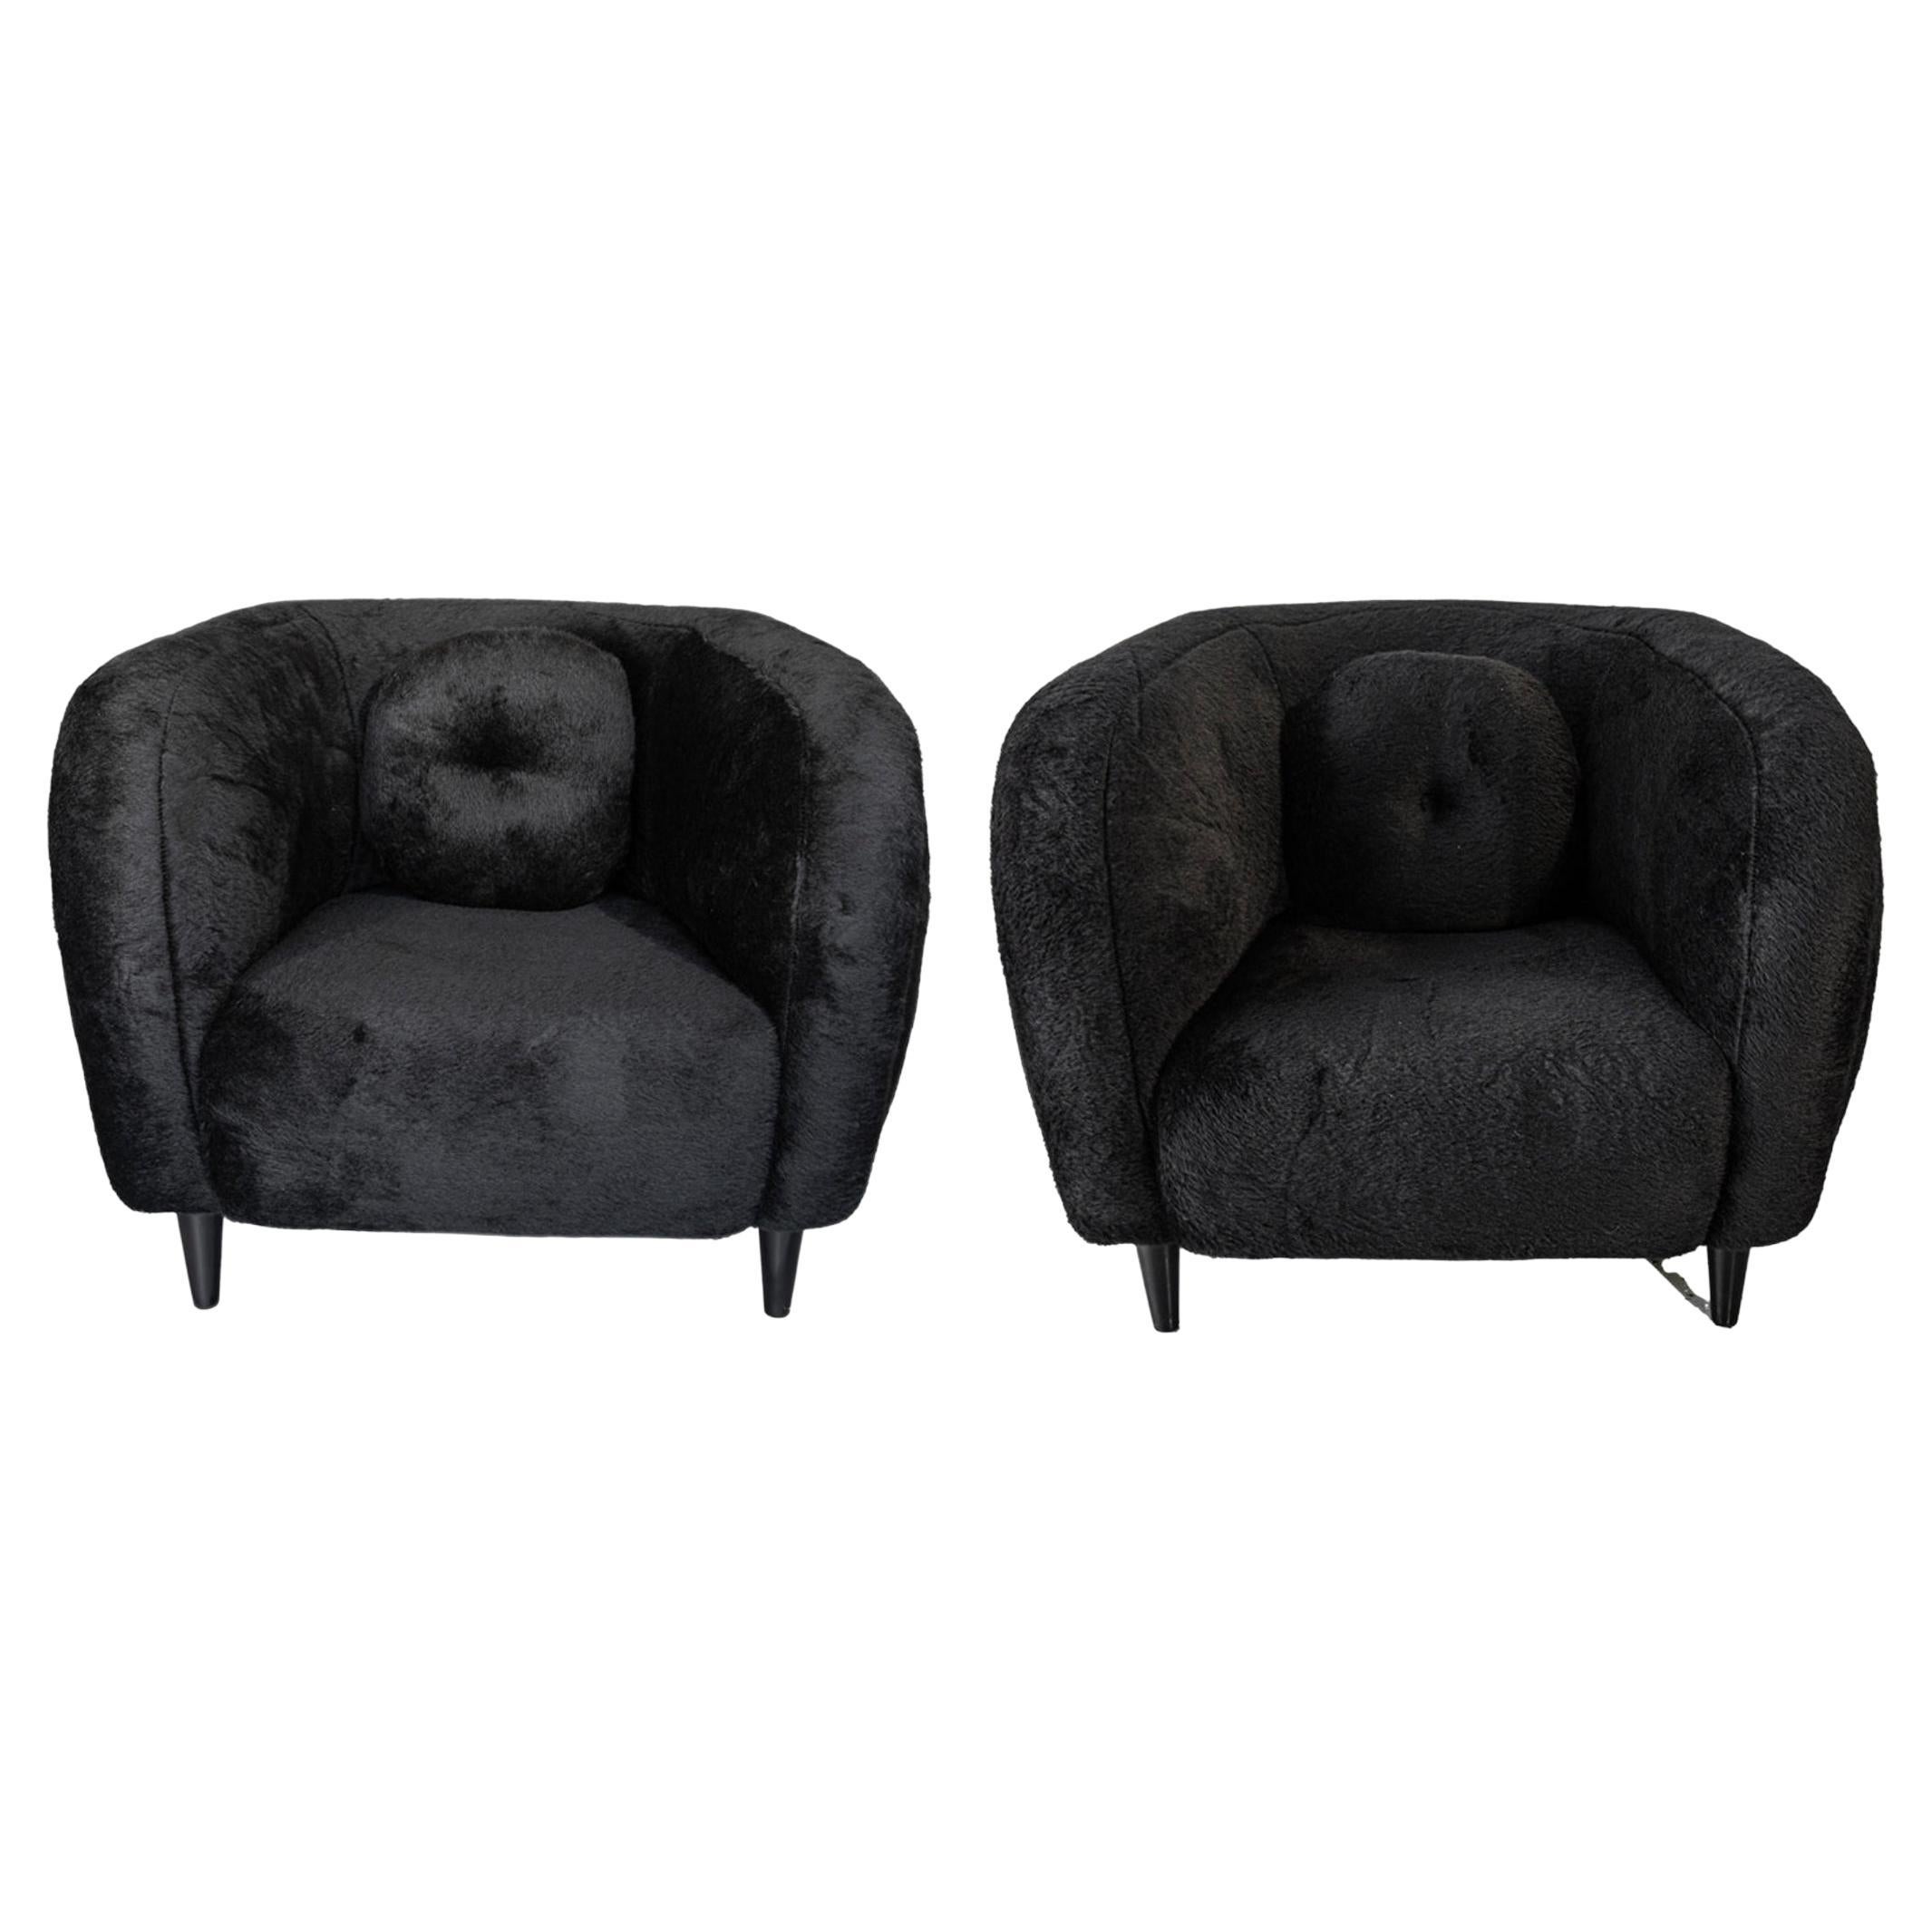 Black Alpaca, Curved, Organic Modern Chairs by Pierre Augustin Rose - set of 2 For Sale